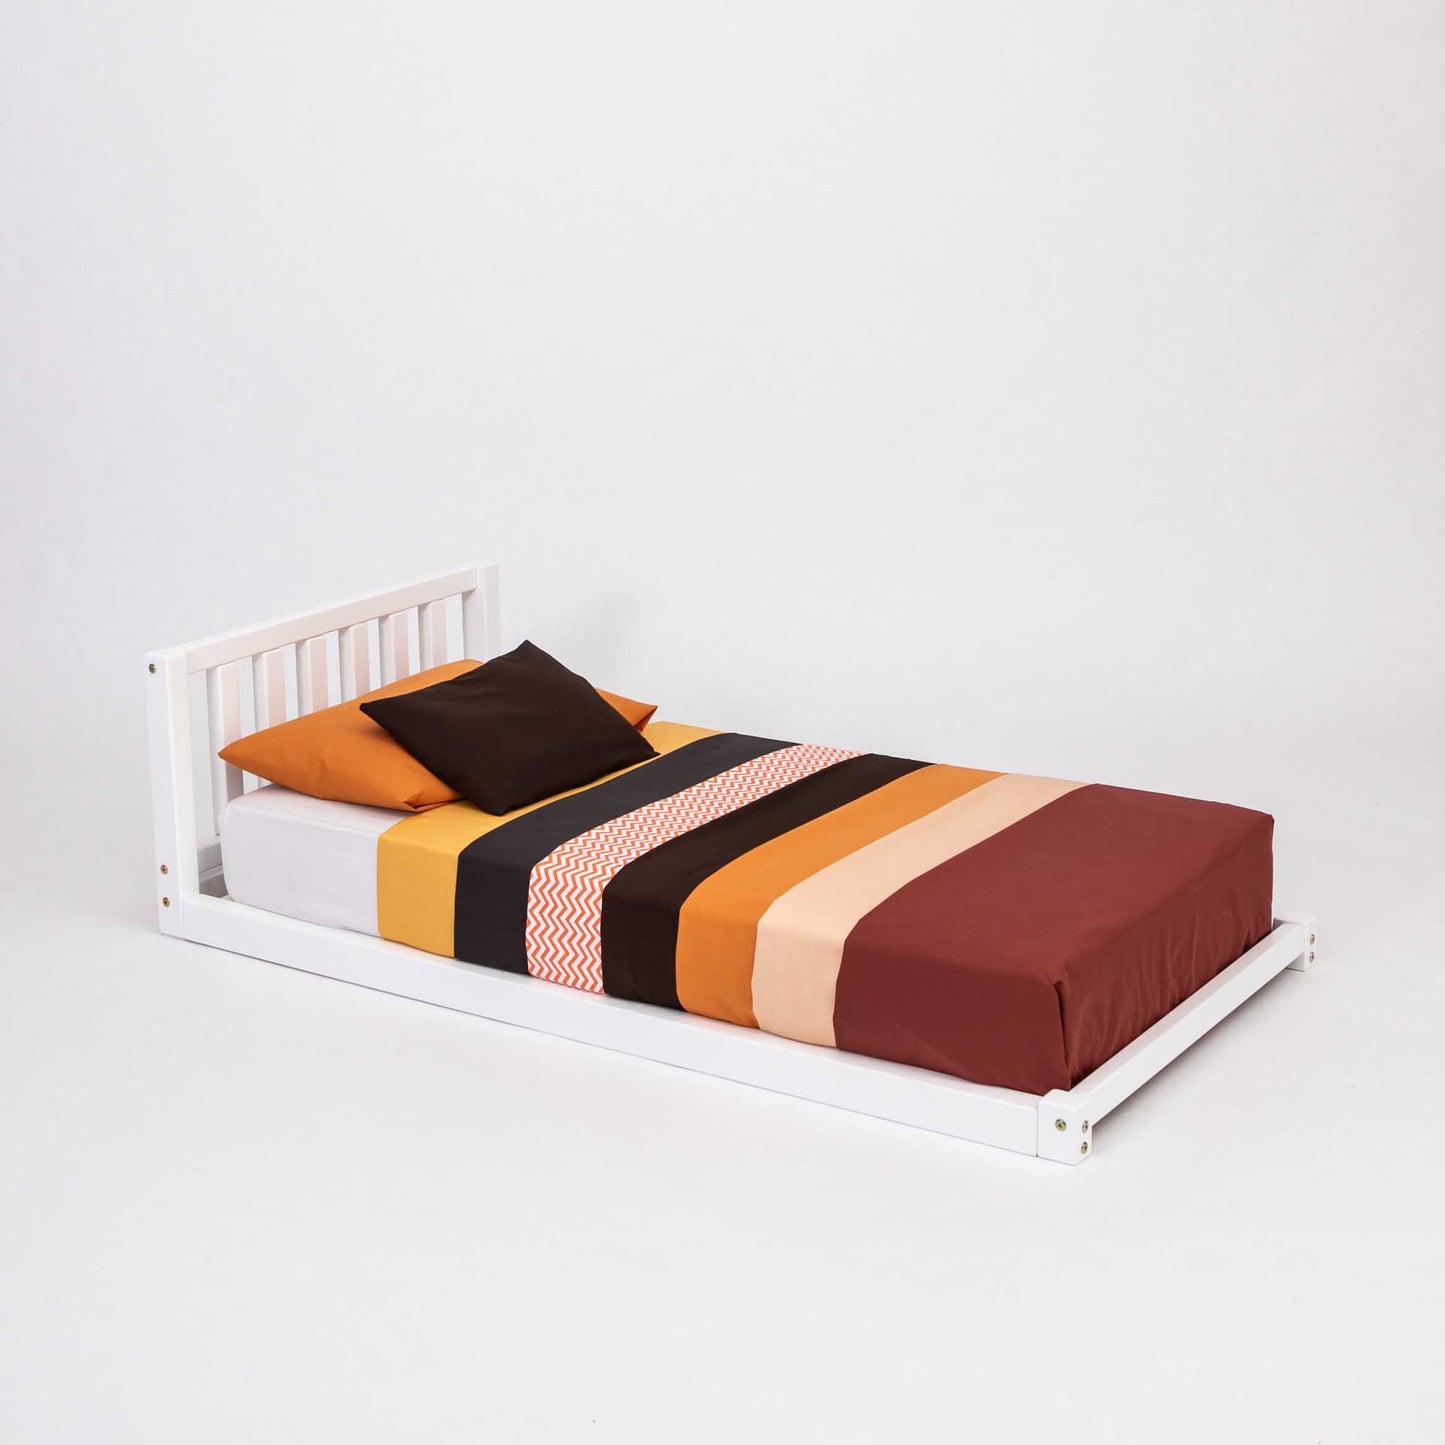 A Sweet Home From Wood 2-in-1 toddler bed on legs with a vertical rail headboard made of solid pine or birch wood, featuring striped sheets.